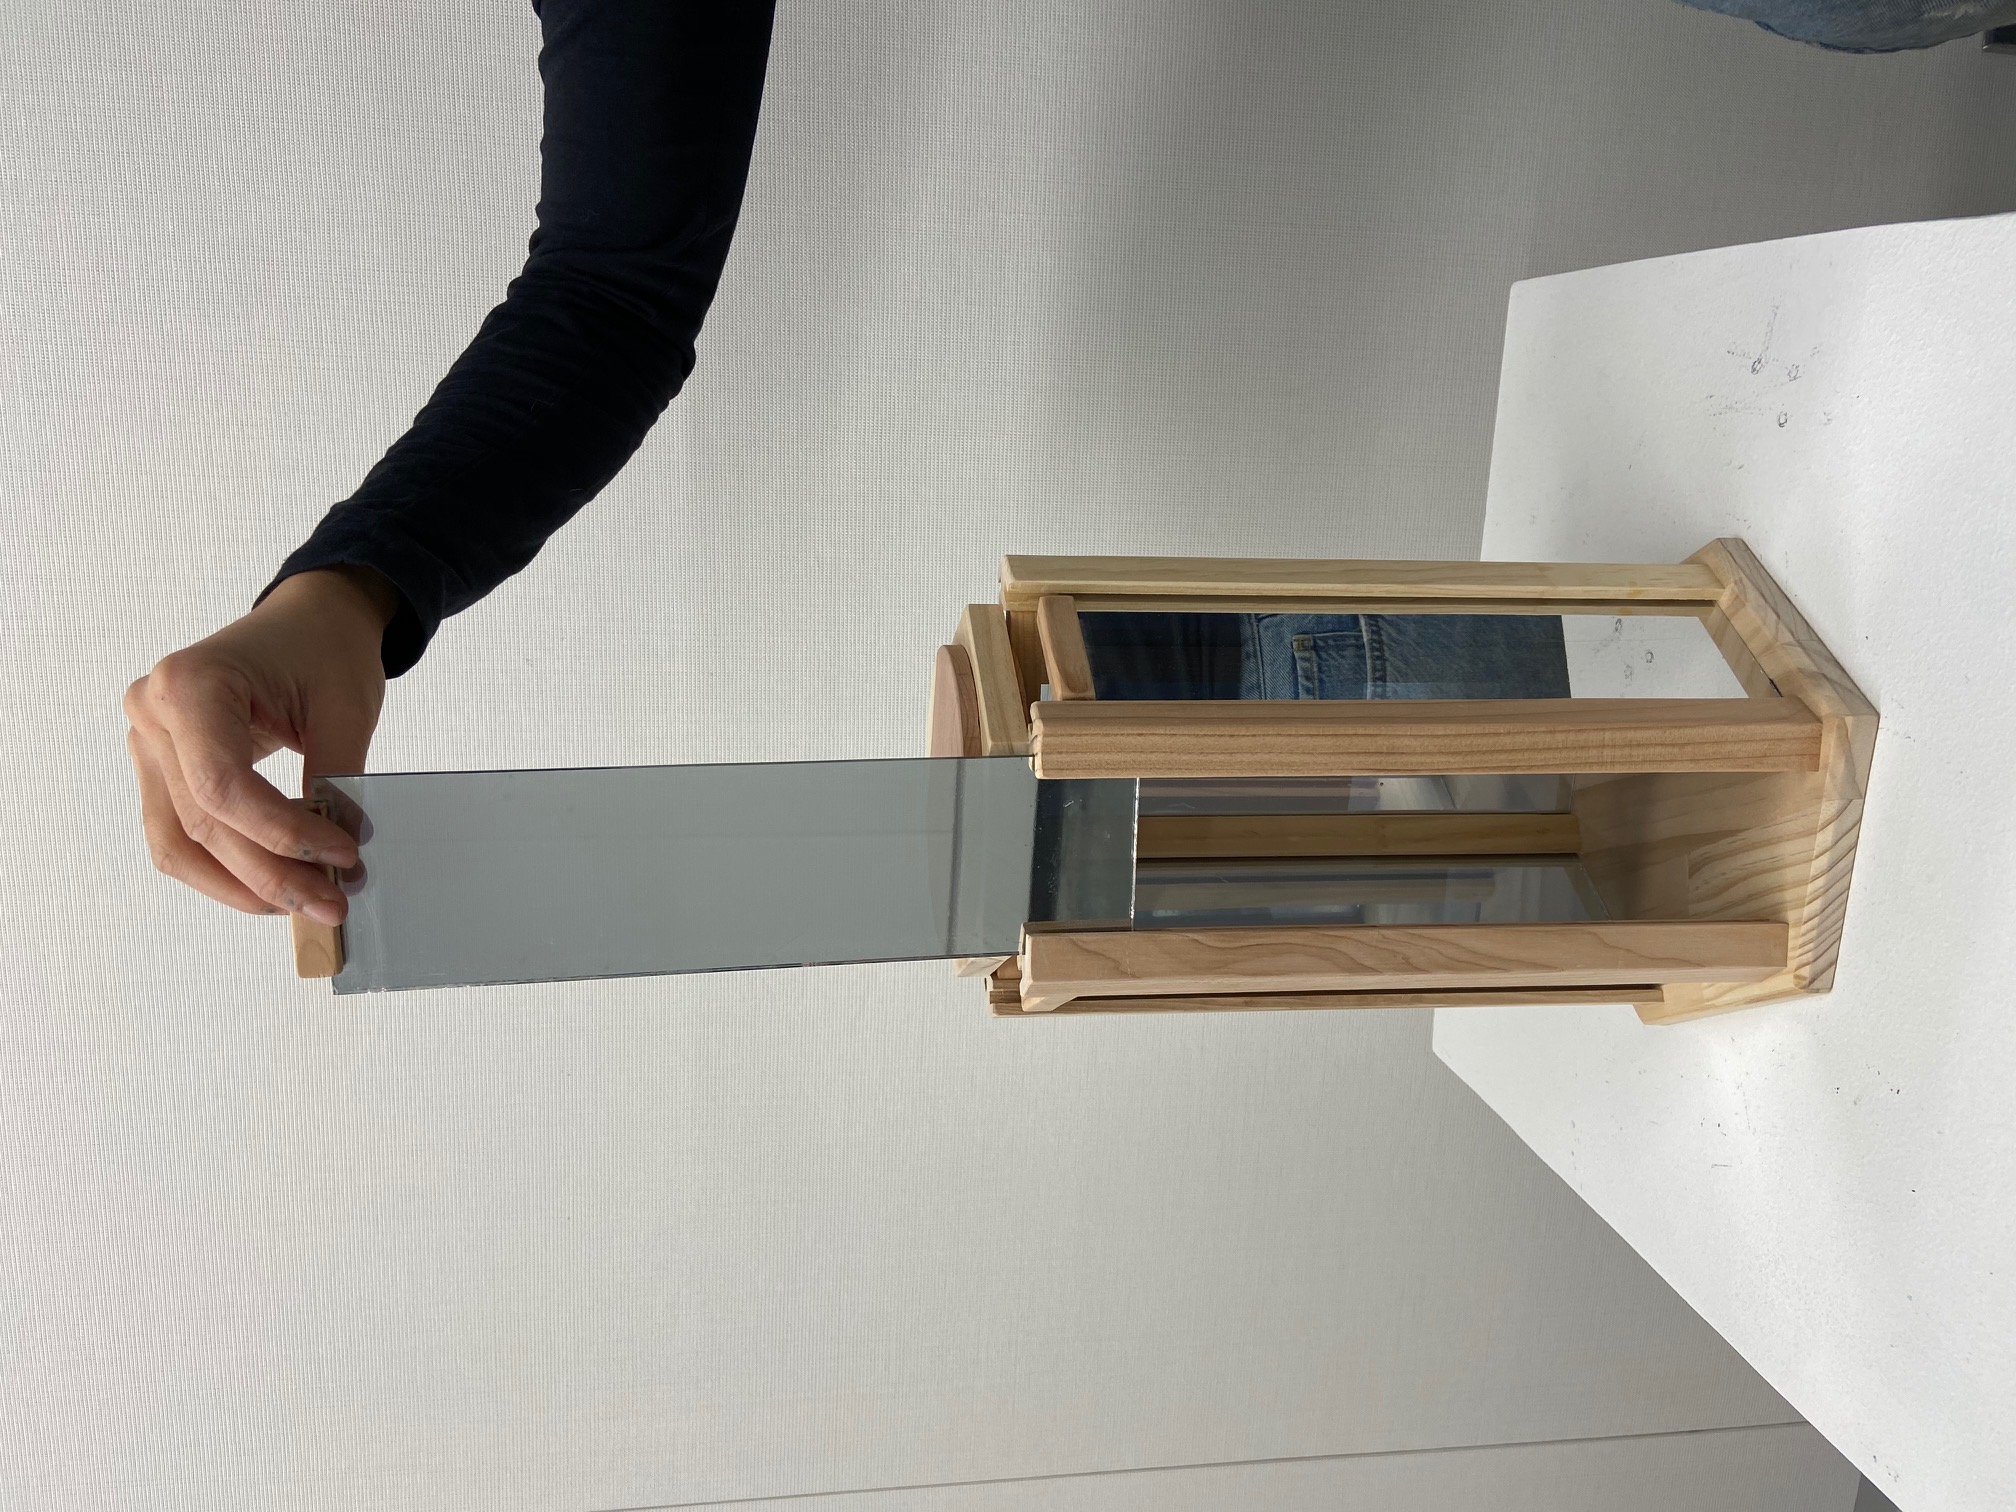 Photo of art work Box of Lies shows a wooden box with a mirror panel being raised.